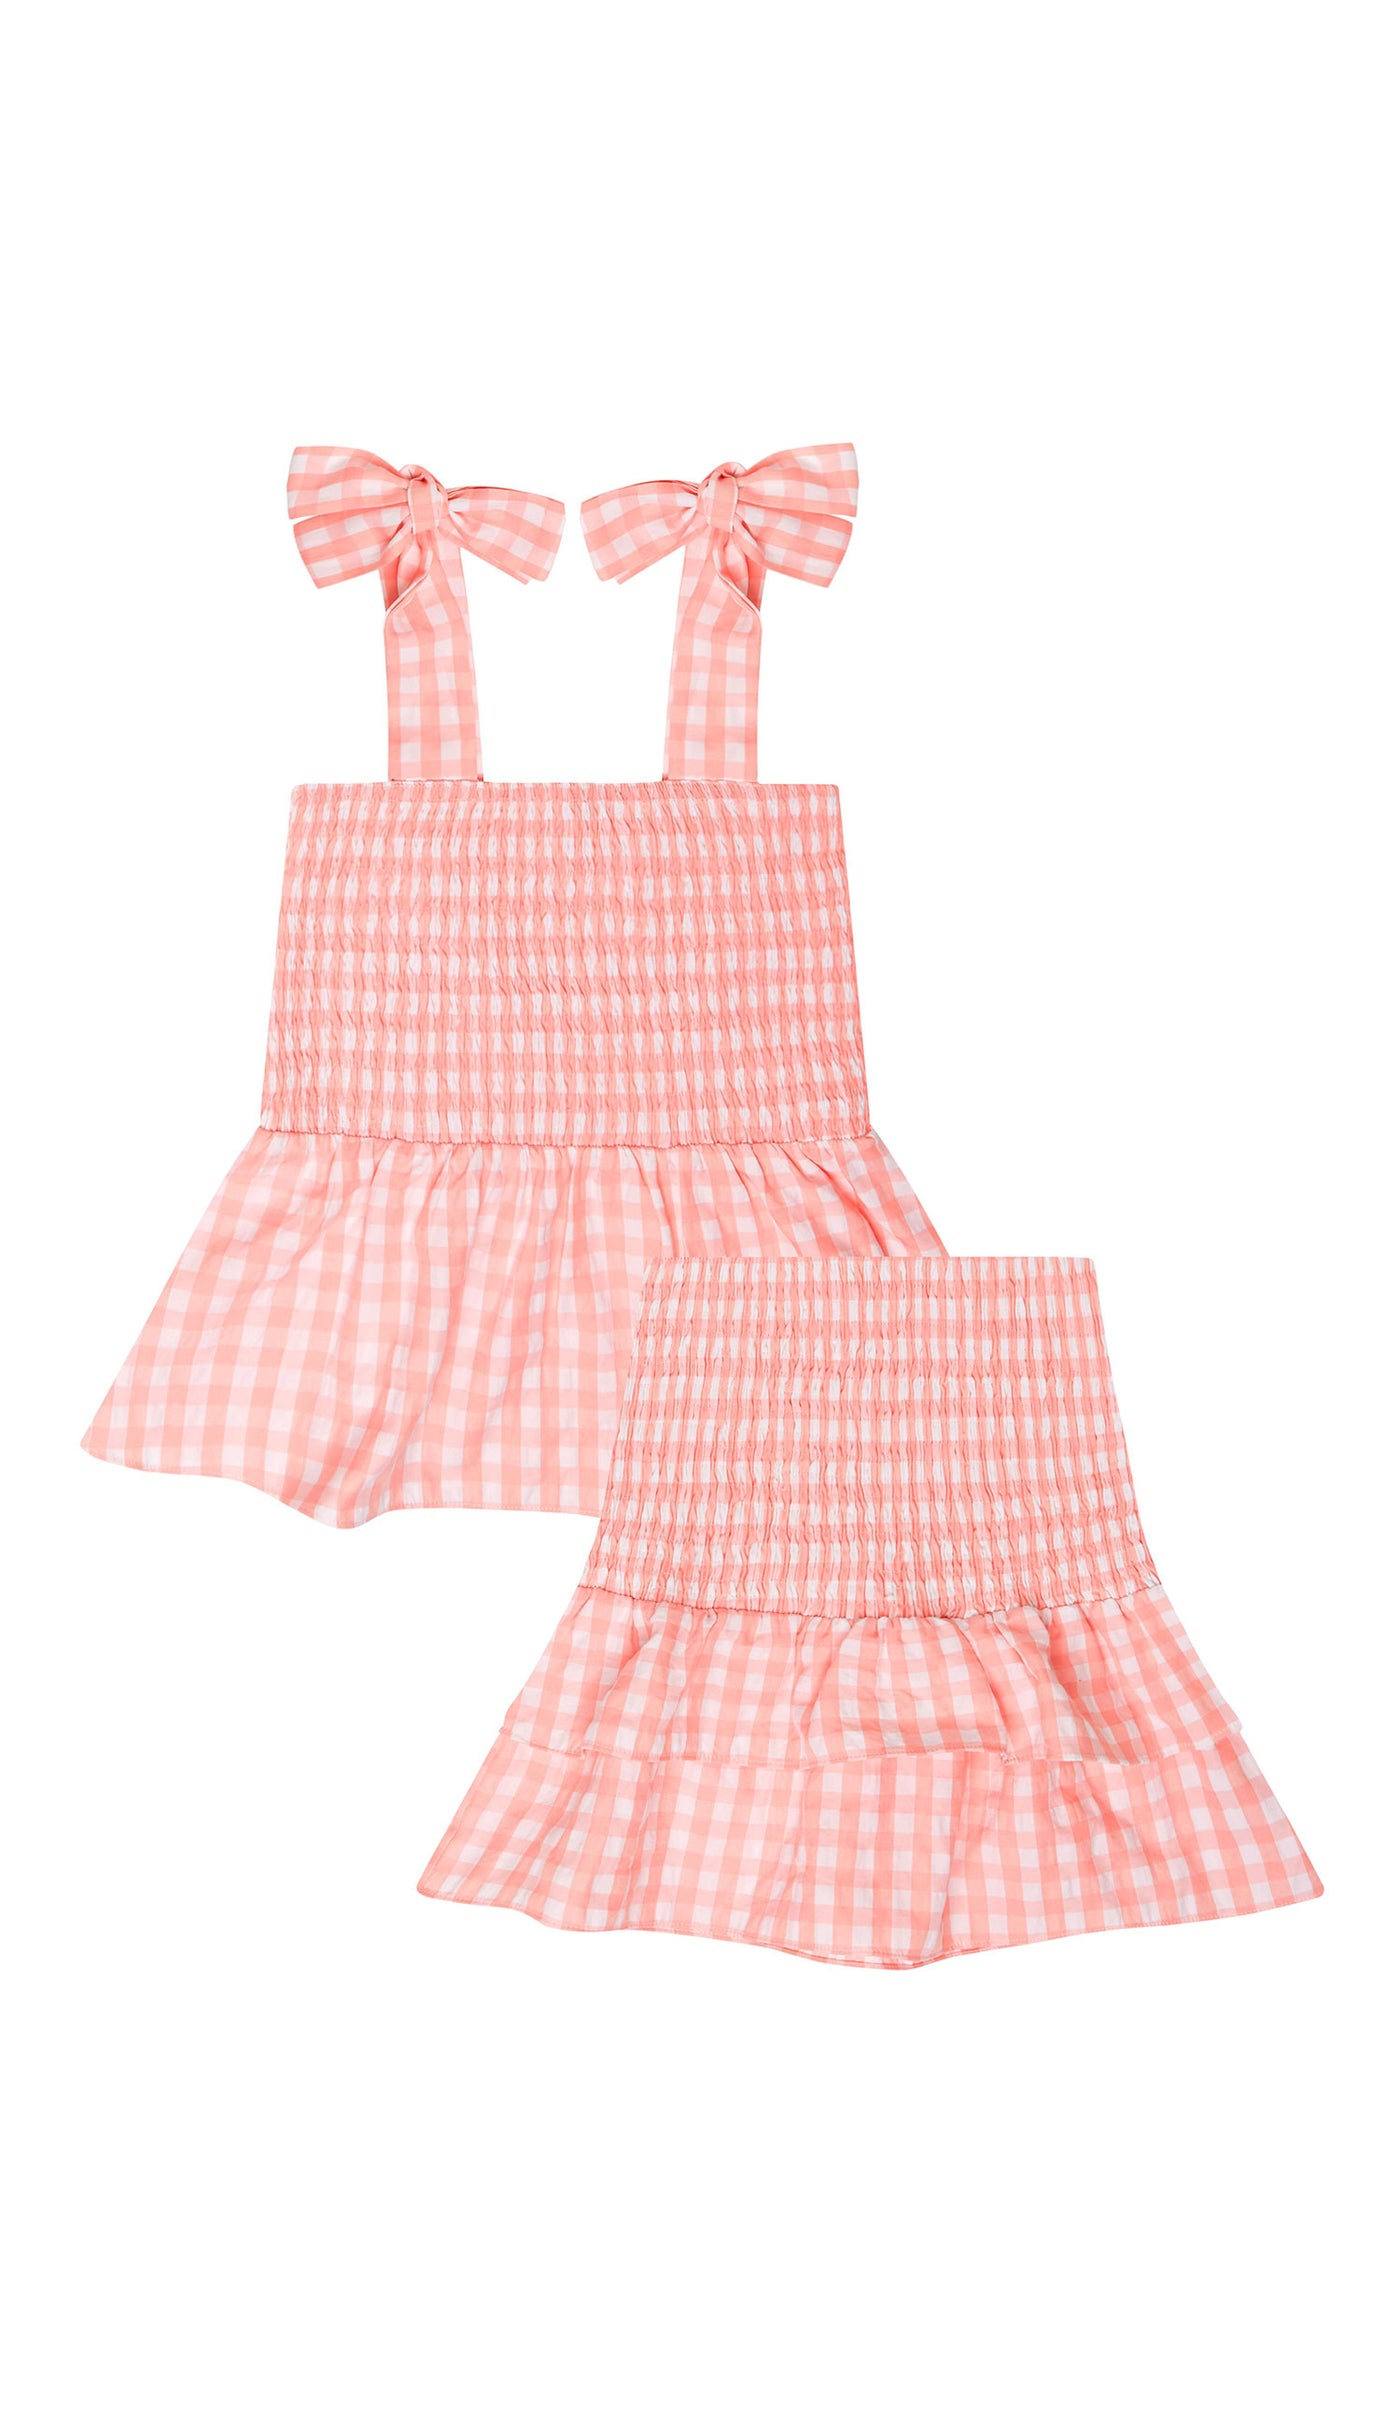 Pink gingham top and skirt